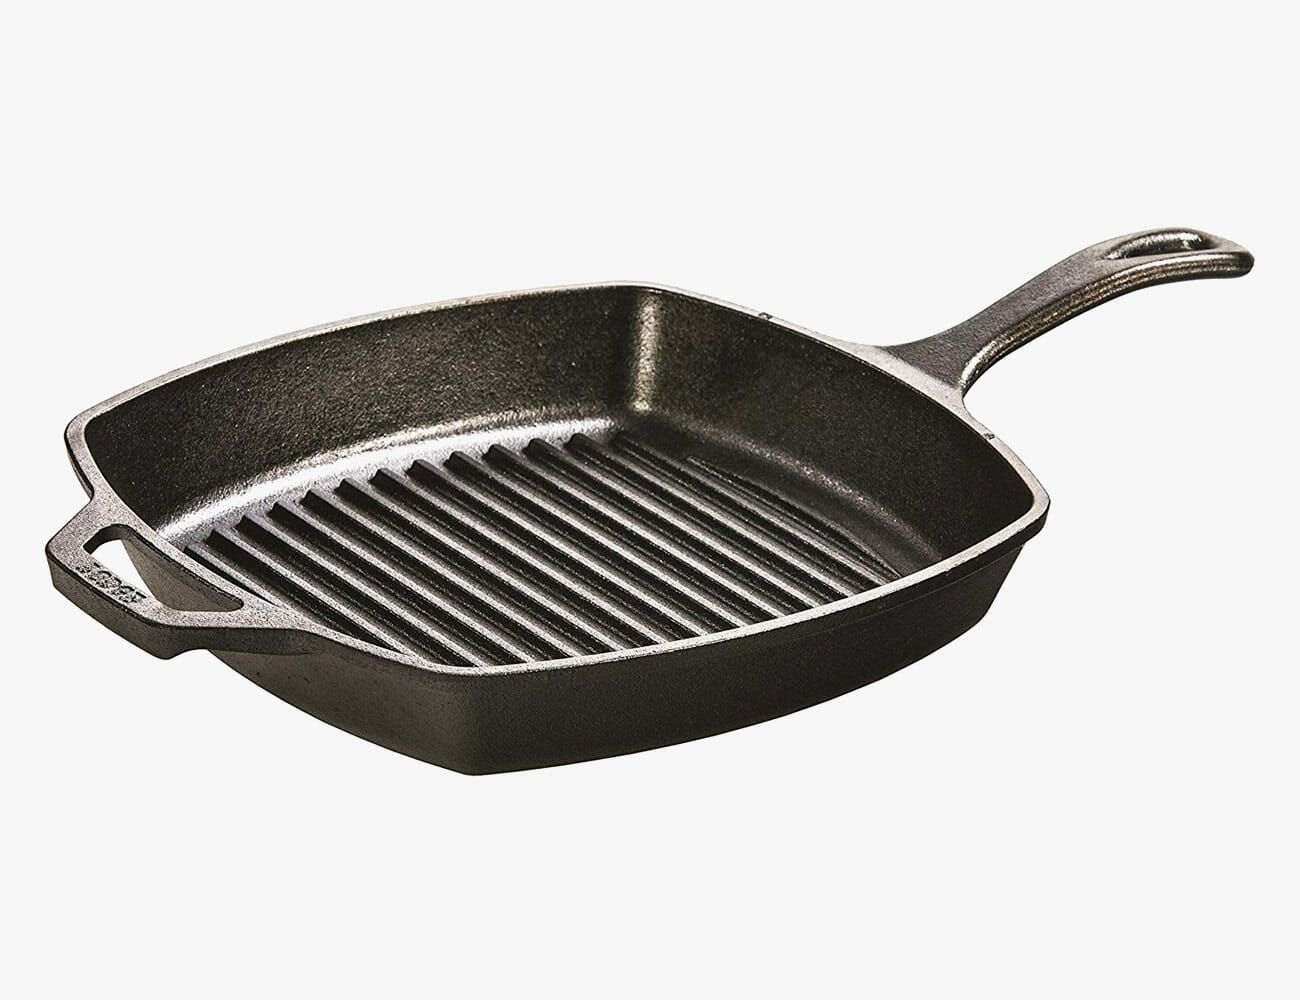  Lodge 13-1/4 Inch Cast Iron Pre-Seasoned Skillet – Signature  Teardrop Handle - Use in the Oven, on the Stove, on the Grill, or Over a  Campfire, Black: Lodge Cast Iron: Home